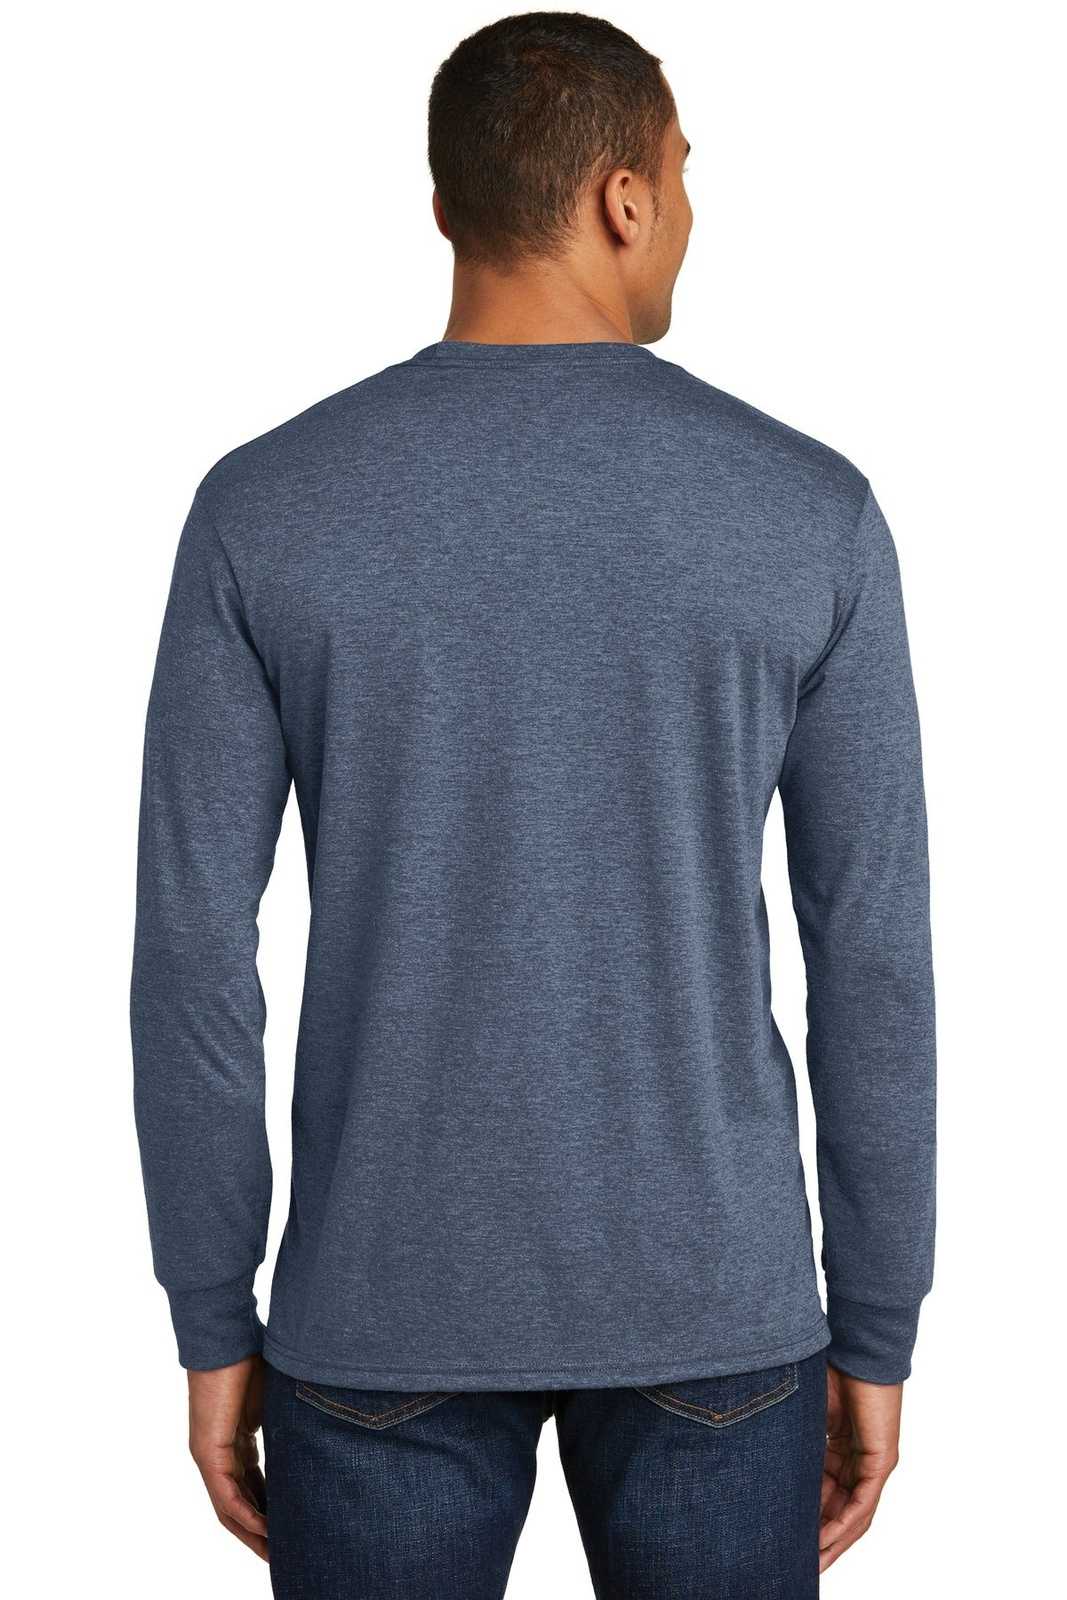 District DM132 Perfect Tri Long Sleeve Tee - Navy Frost - HIT a Double - 2